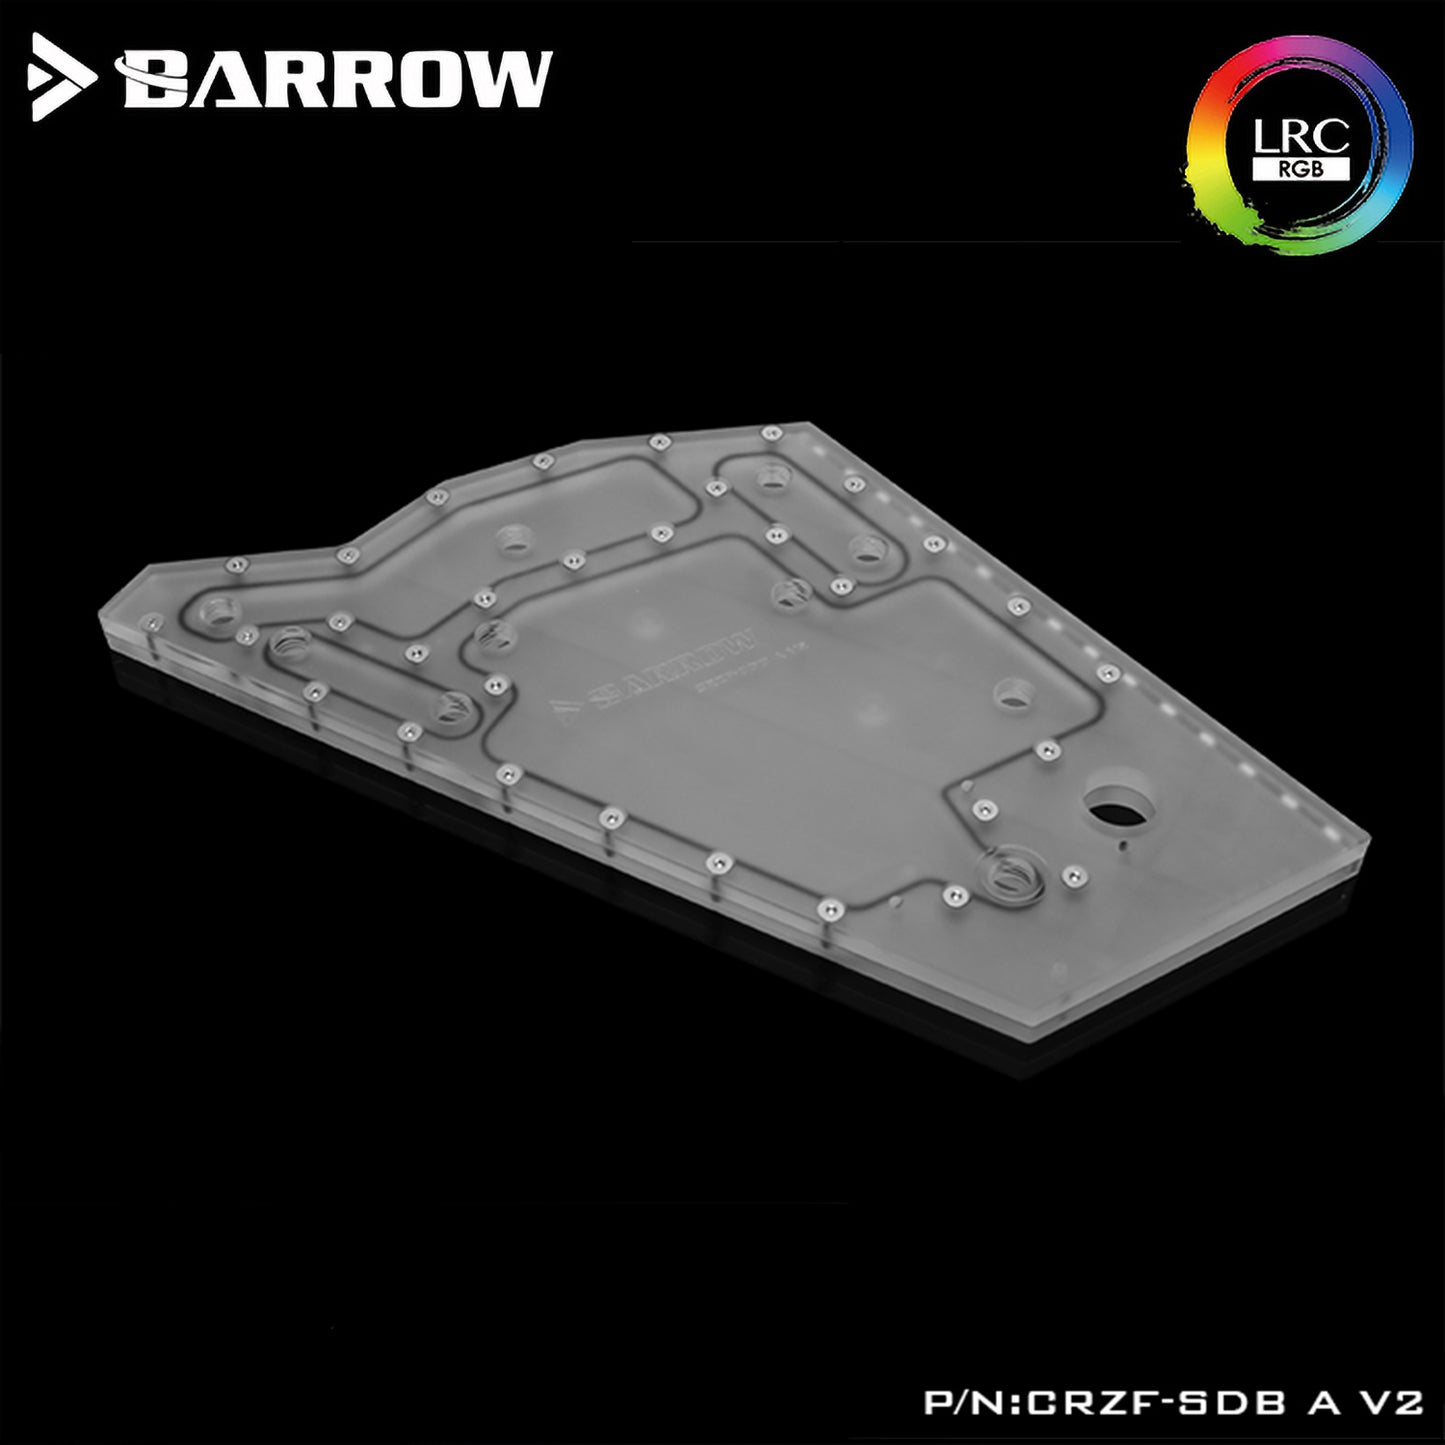 Barrow CRZF-SDB V2/CRZF-SDB A V2, Waterway Boards For Cougar Conquer Case, For Intel CPU Water Block & Single/Double GPU Building